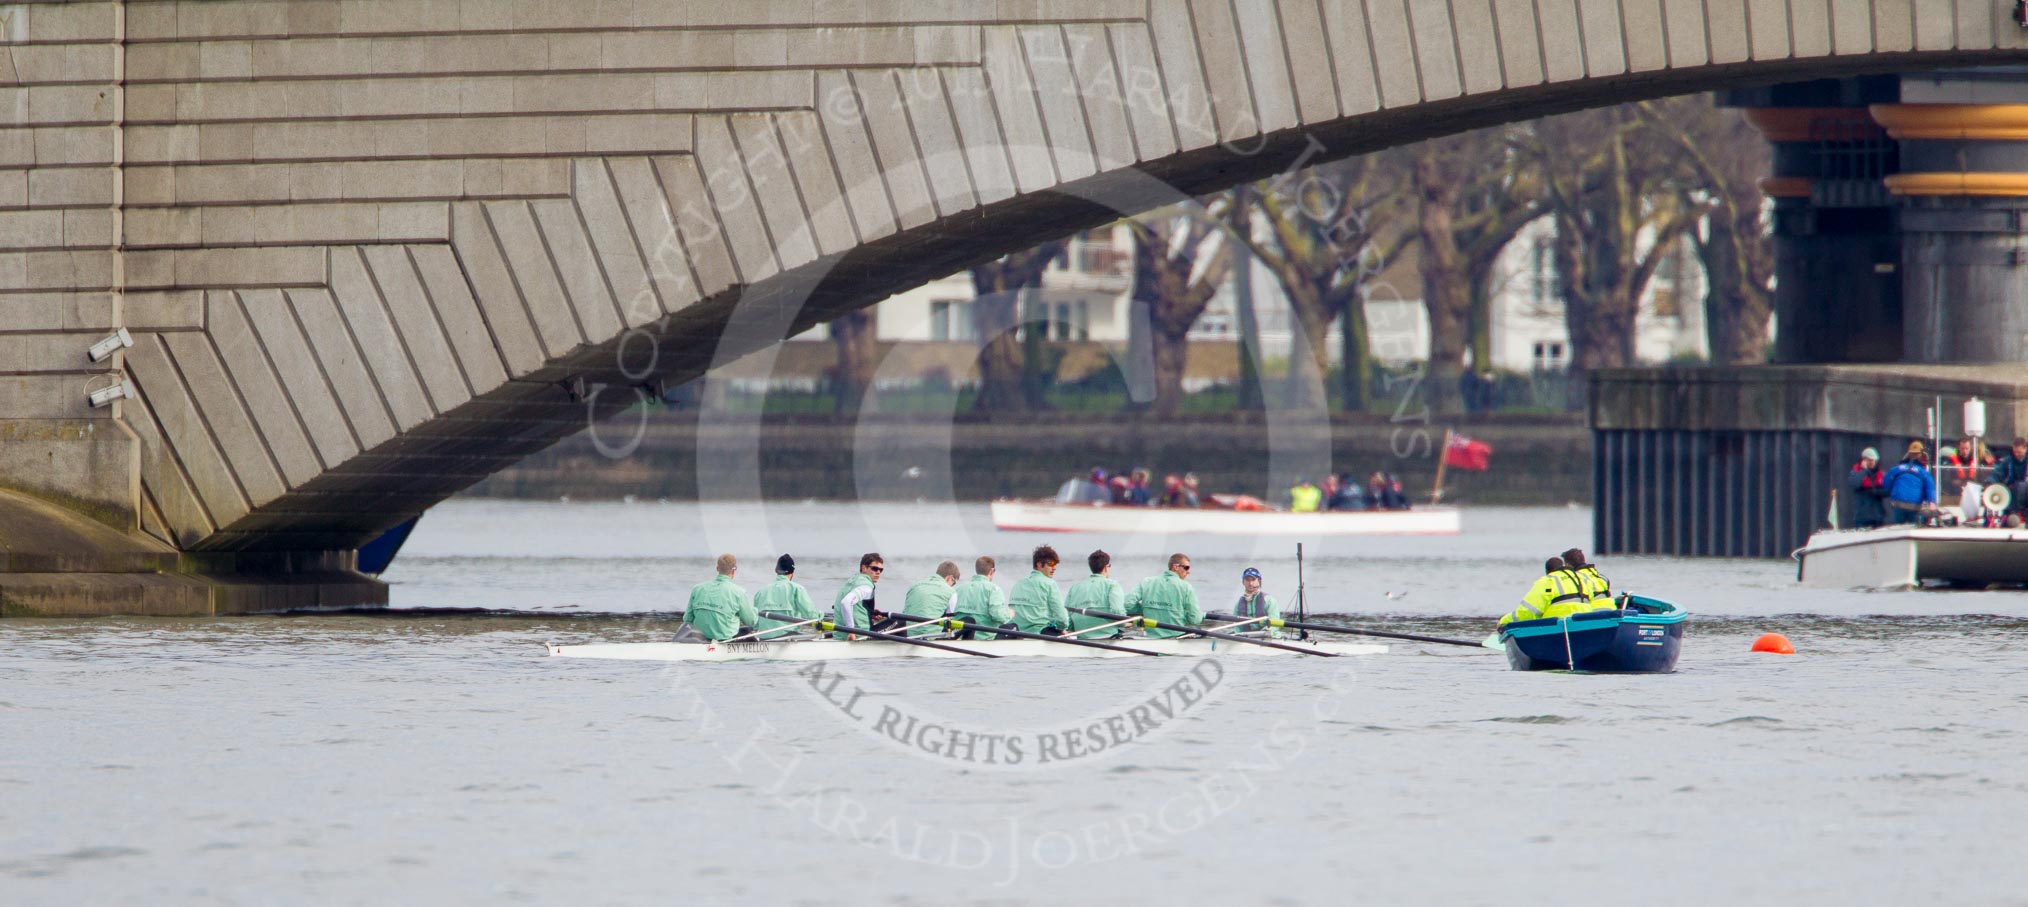 The Boat Race 2013.
Putney,
London SW15,

United Kingdom,
on 31 March 2013 at 16:22, image #240